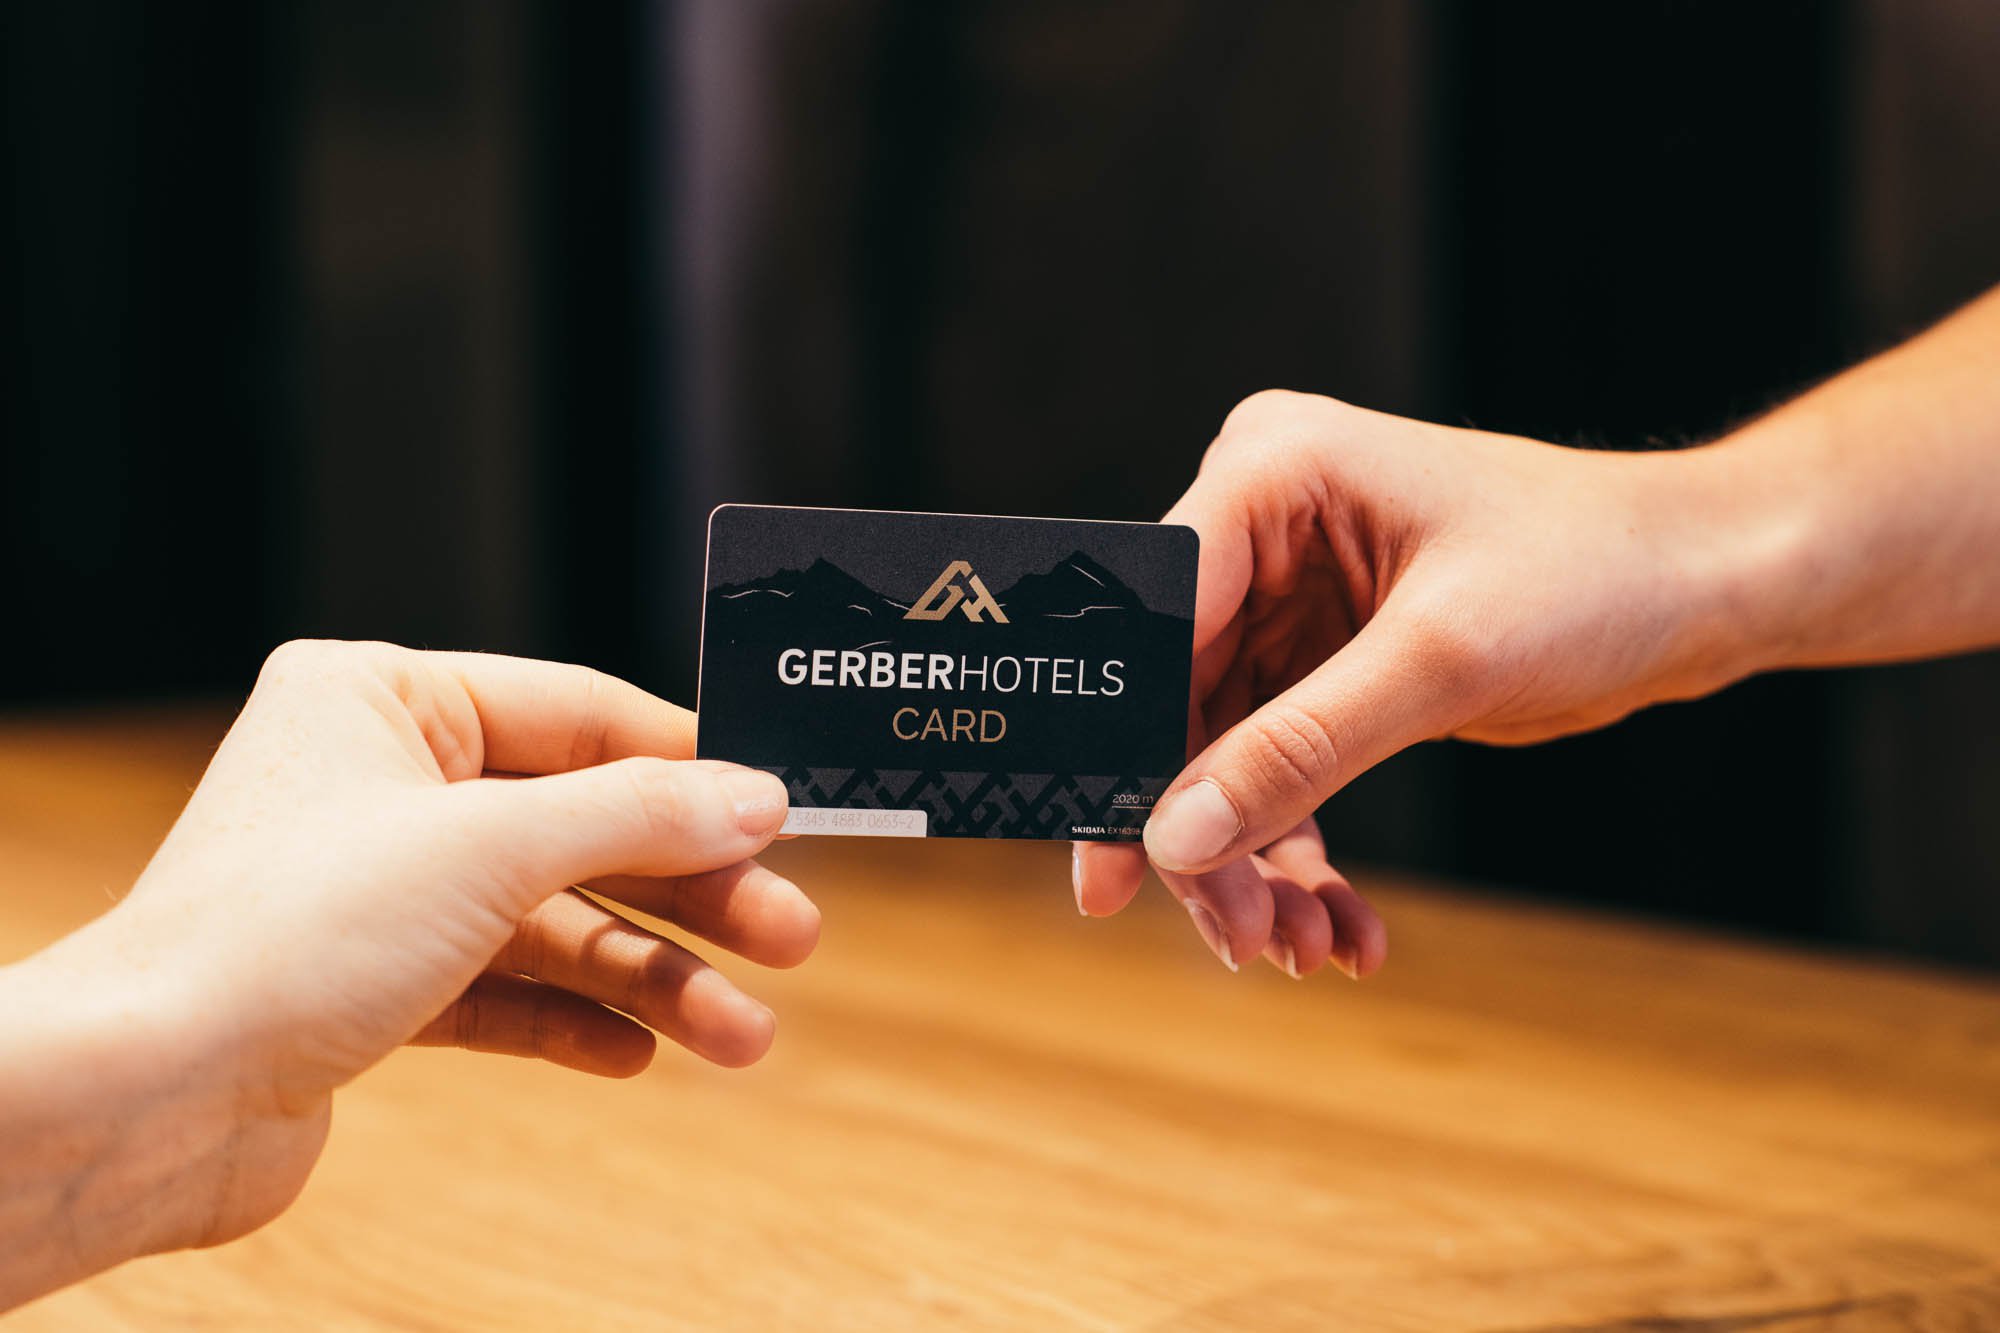 The Gerber Card has a range of talents, serving as the key card for your room as well as your ski pass. It enables cashless payment in all Gerber establishments in the Kühtai, with cardholders receiving a 10% discount on meals in all Gerber establishments.